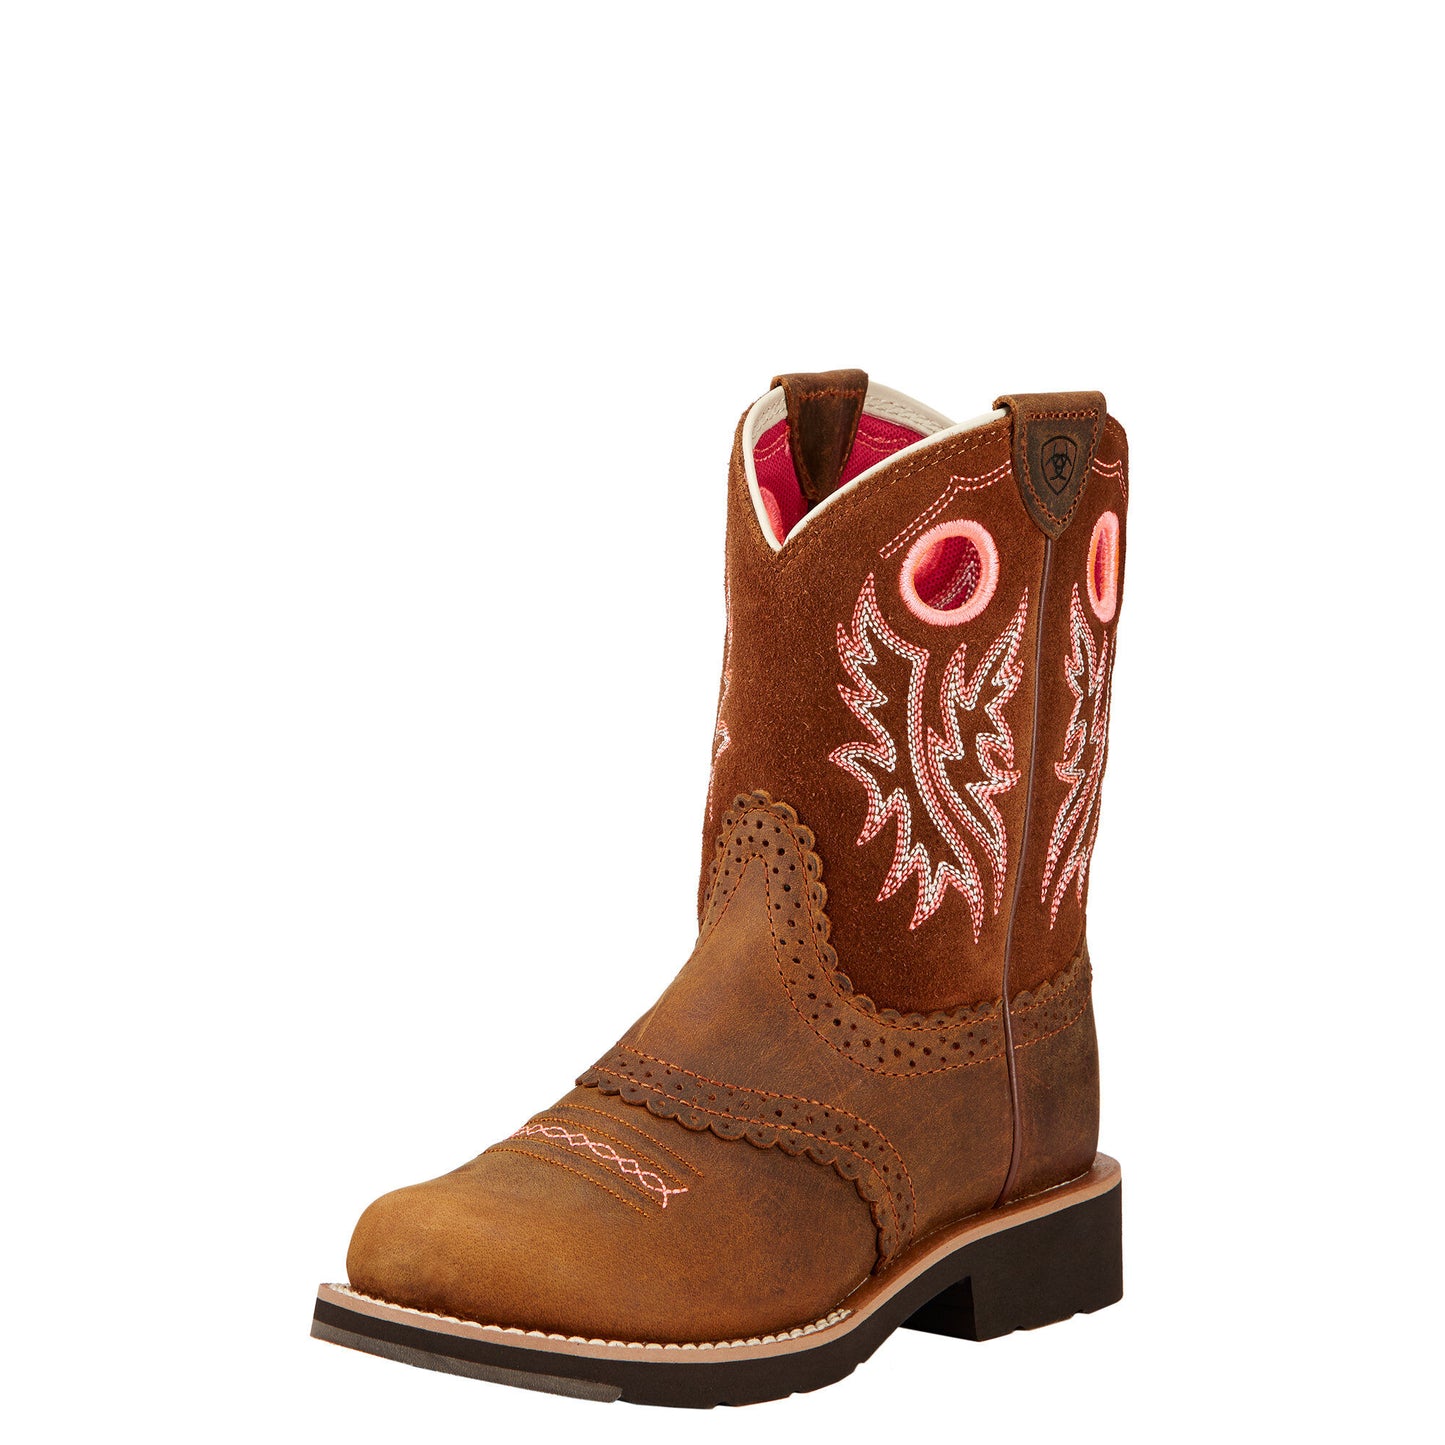 Ariat Kids Fatbaby Cowgirl Boot - Powder Brown/Western Brown - French's Boots